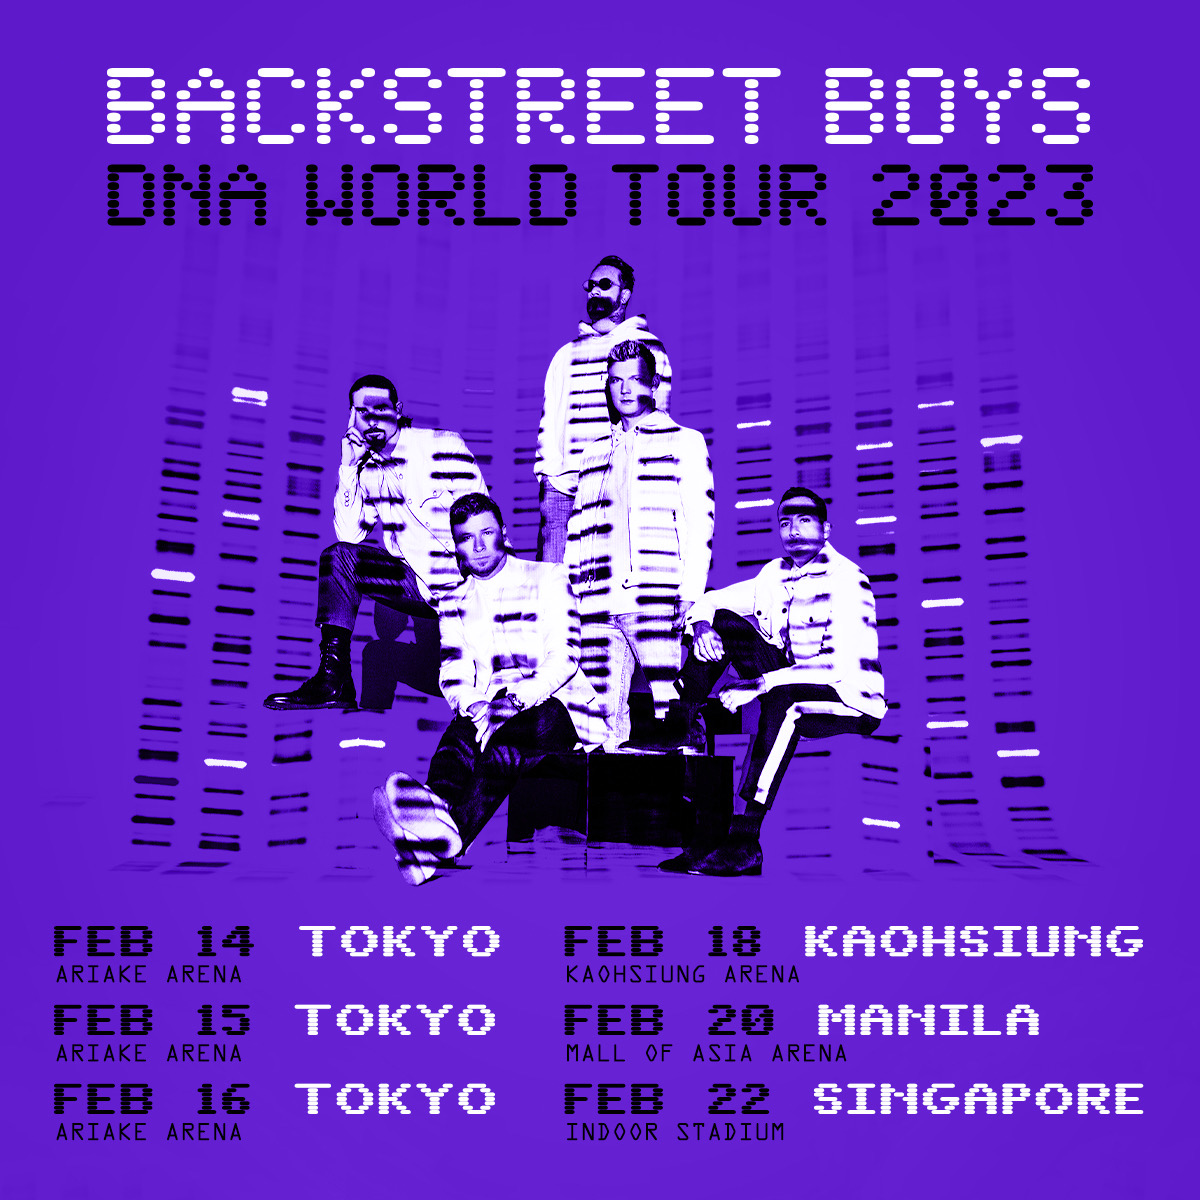 JUST ANNOUNCED: DNA World Tour is Headed to Asia!